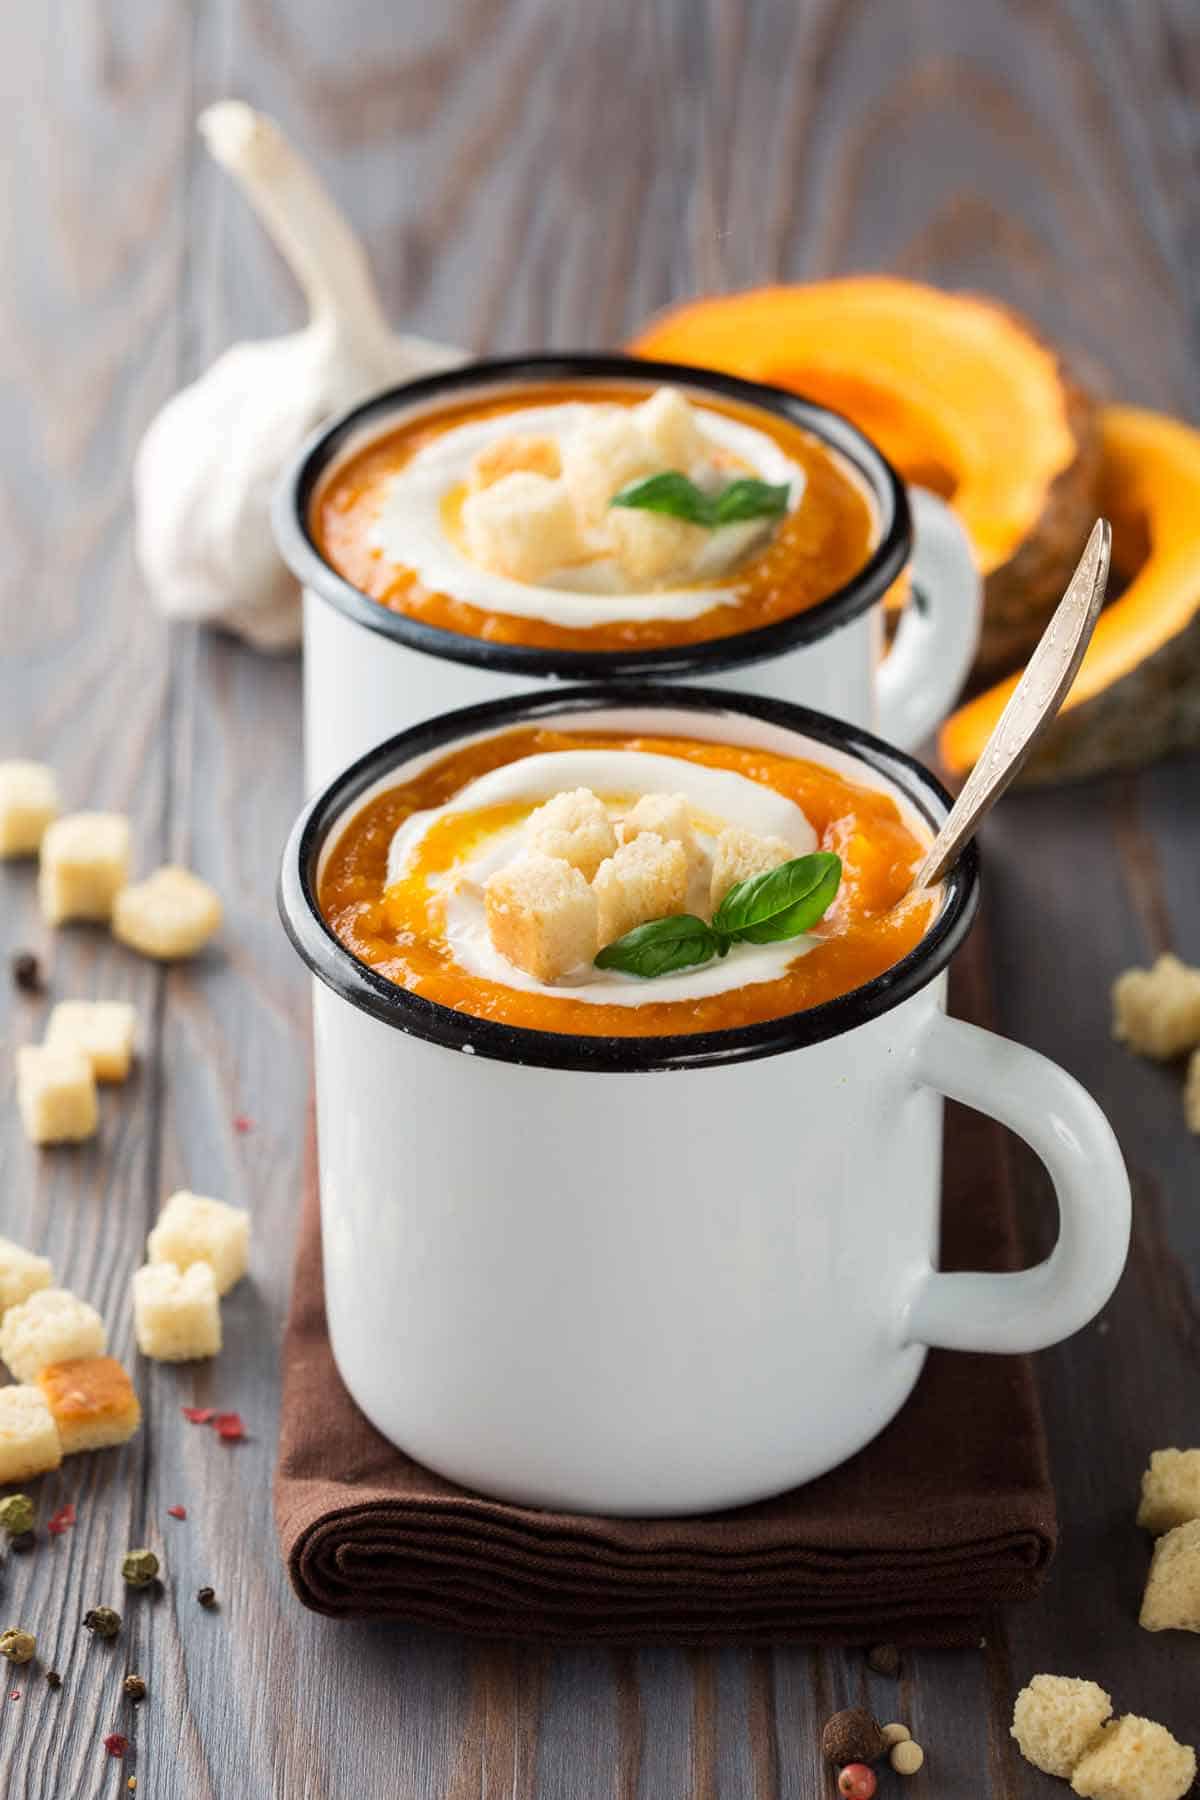 Two mugs of pumpkin soup garnished with croutons.